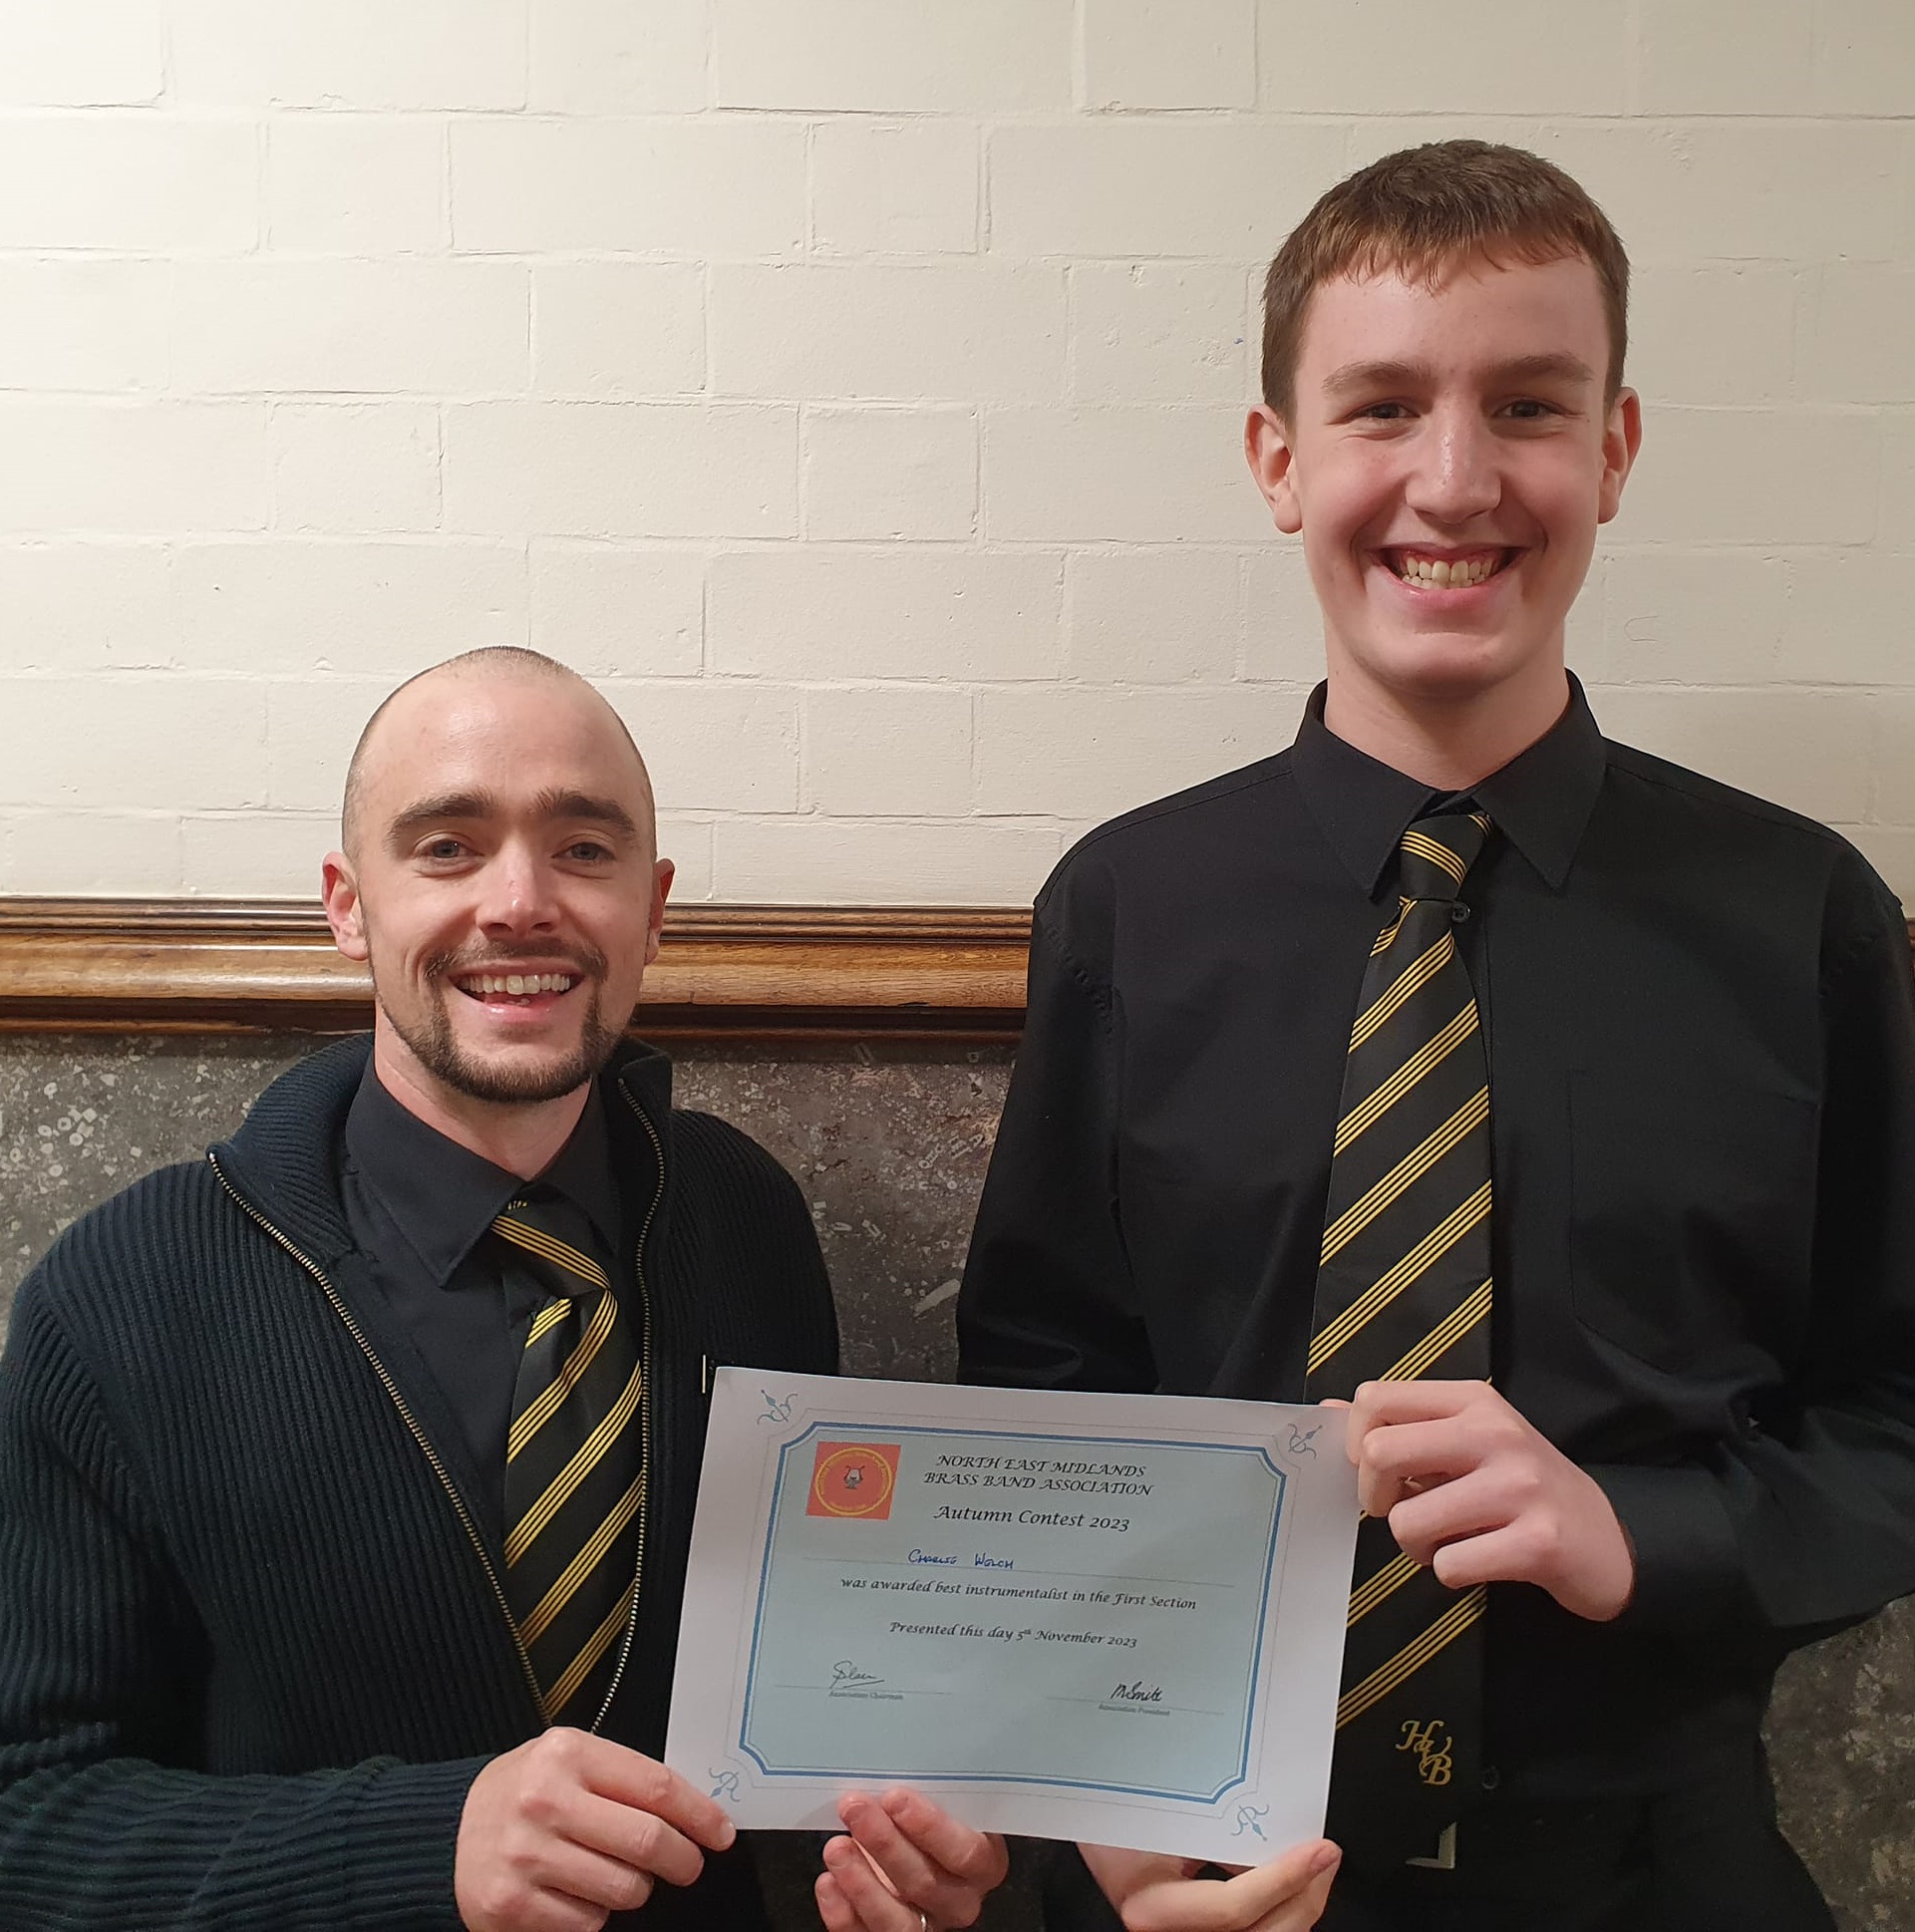 Charlie Welch and Will Lord with the first place certificate from NEMBBA contest